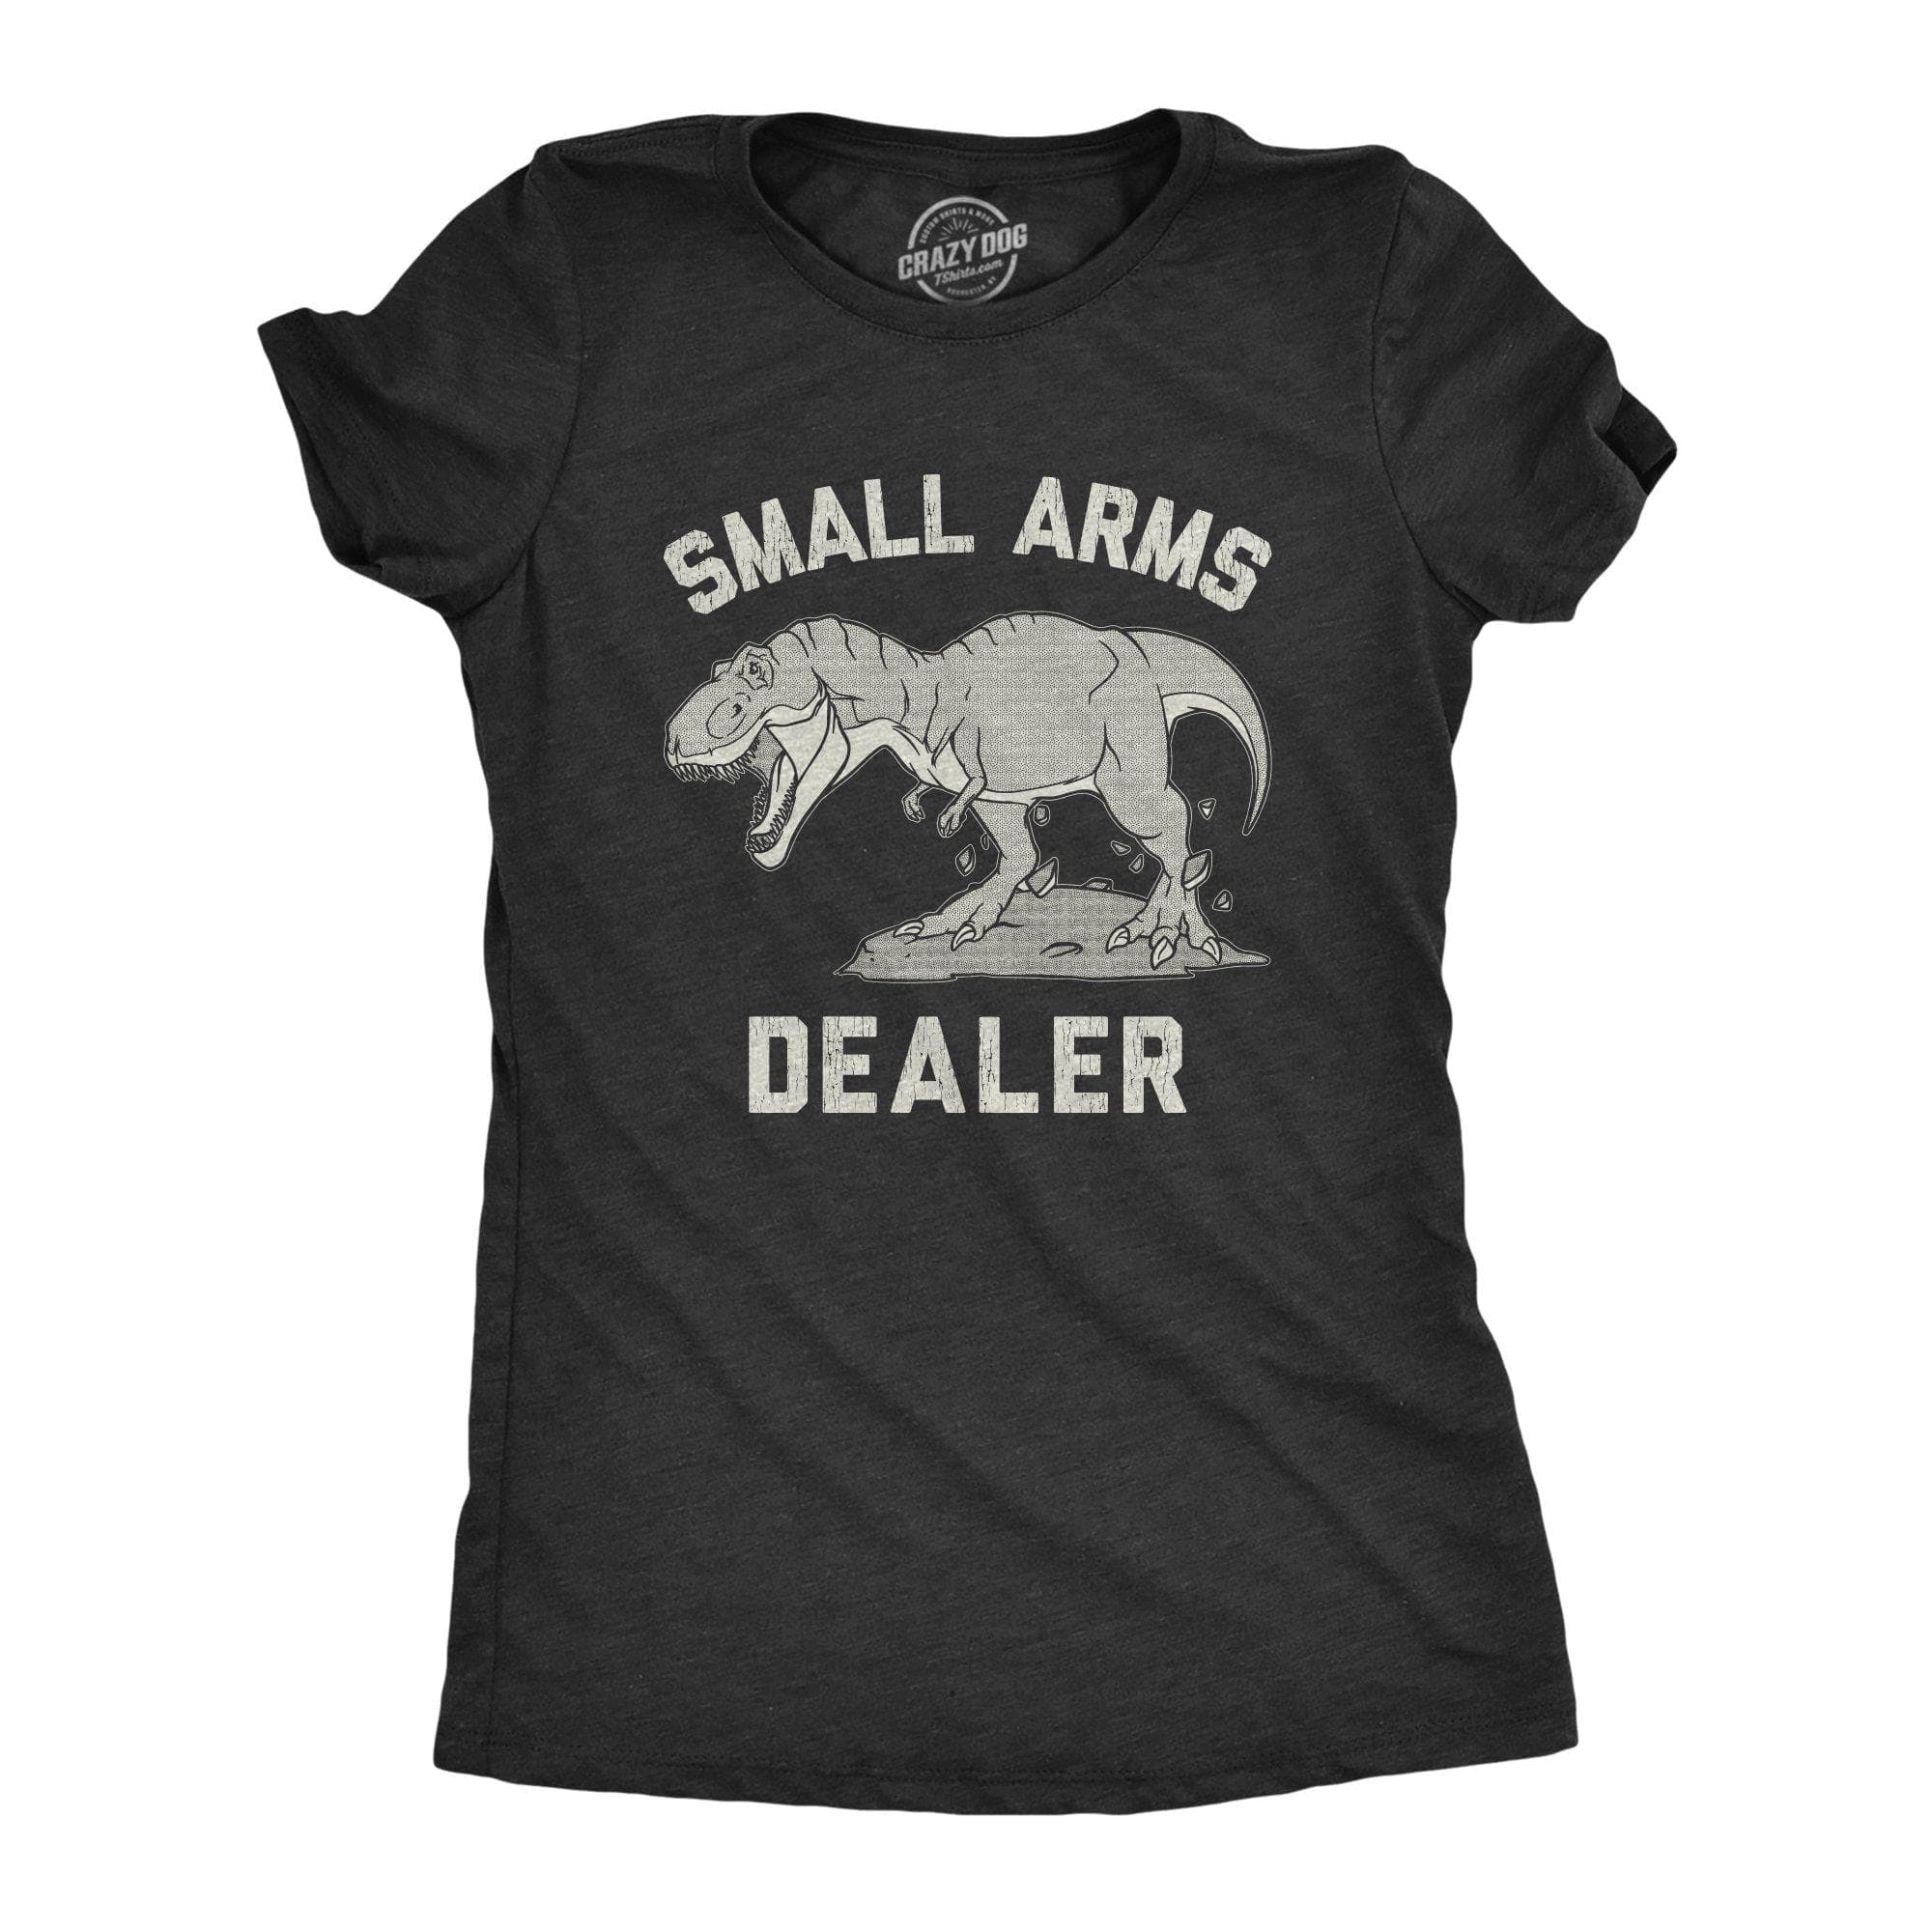 Small Arms Dealer Women's Tshirt - Crazy Dog T-Shirts